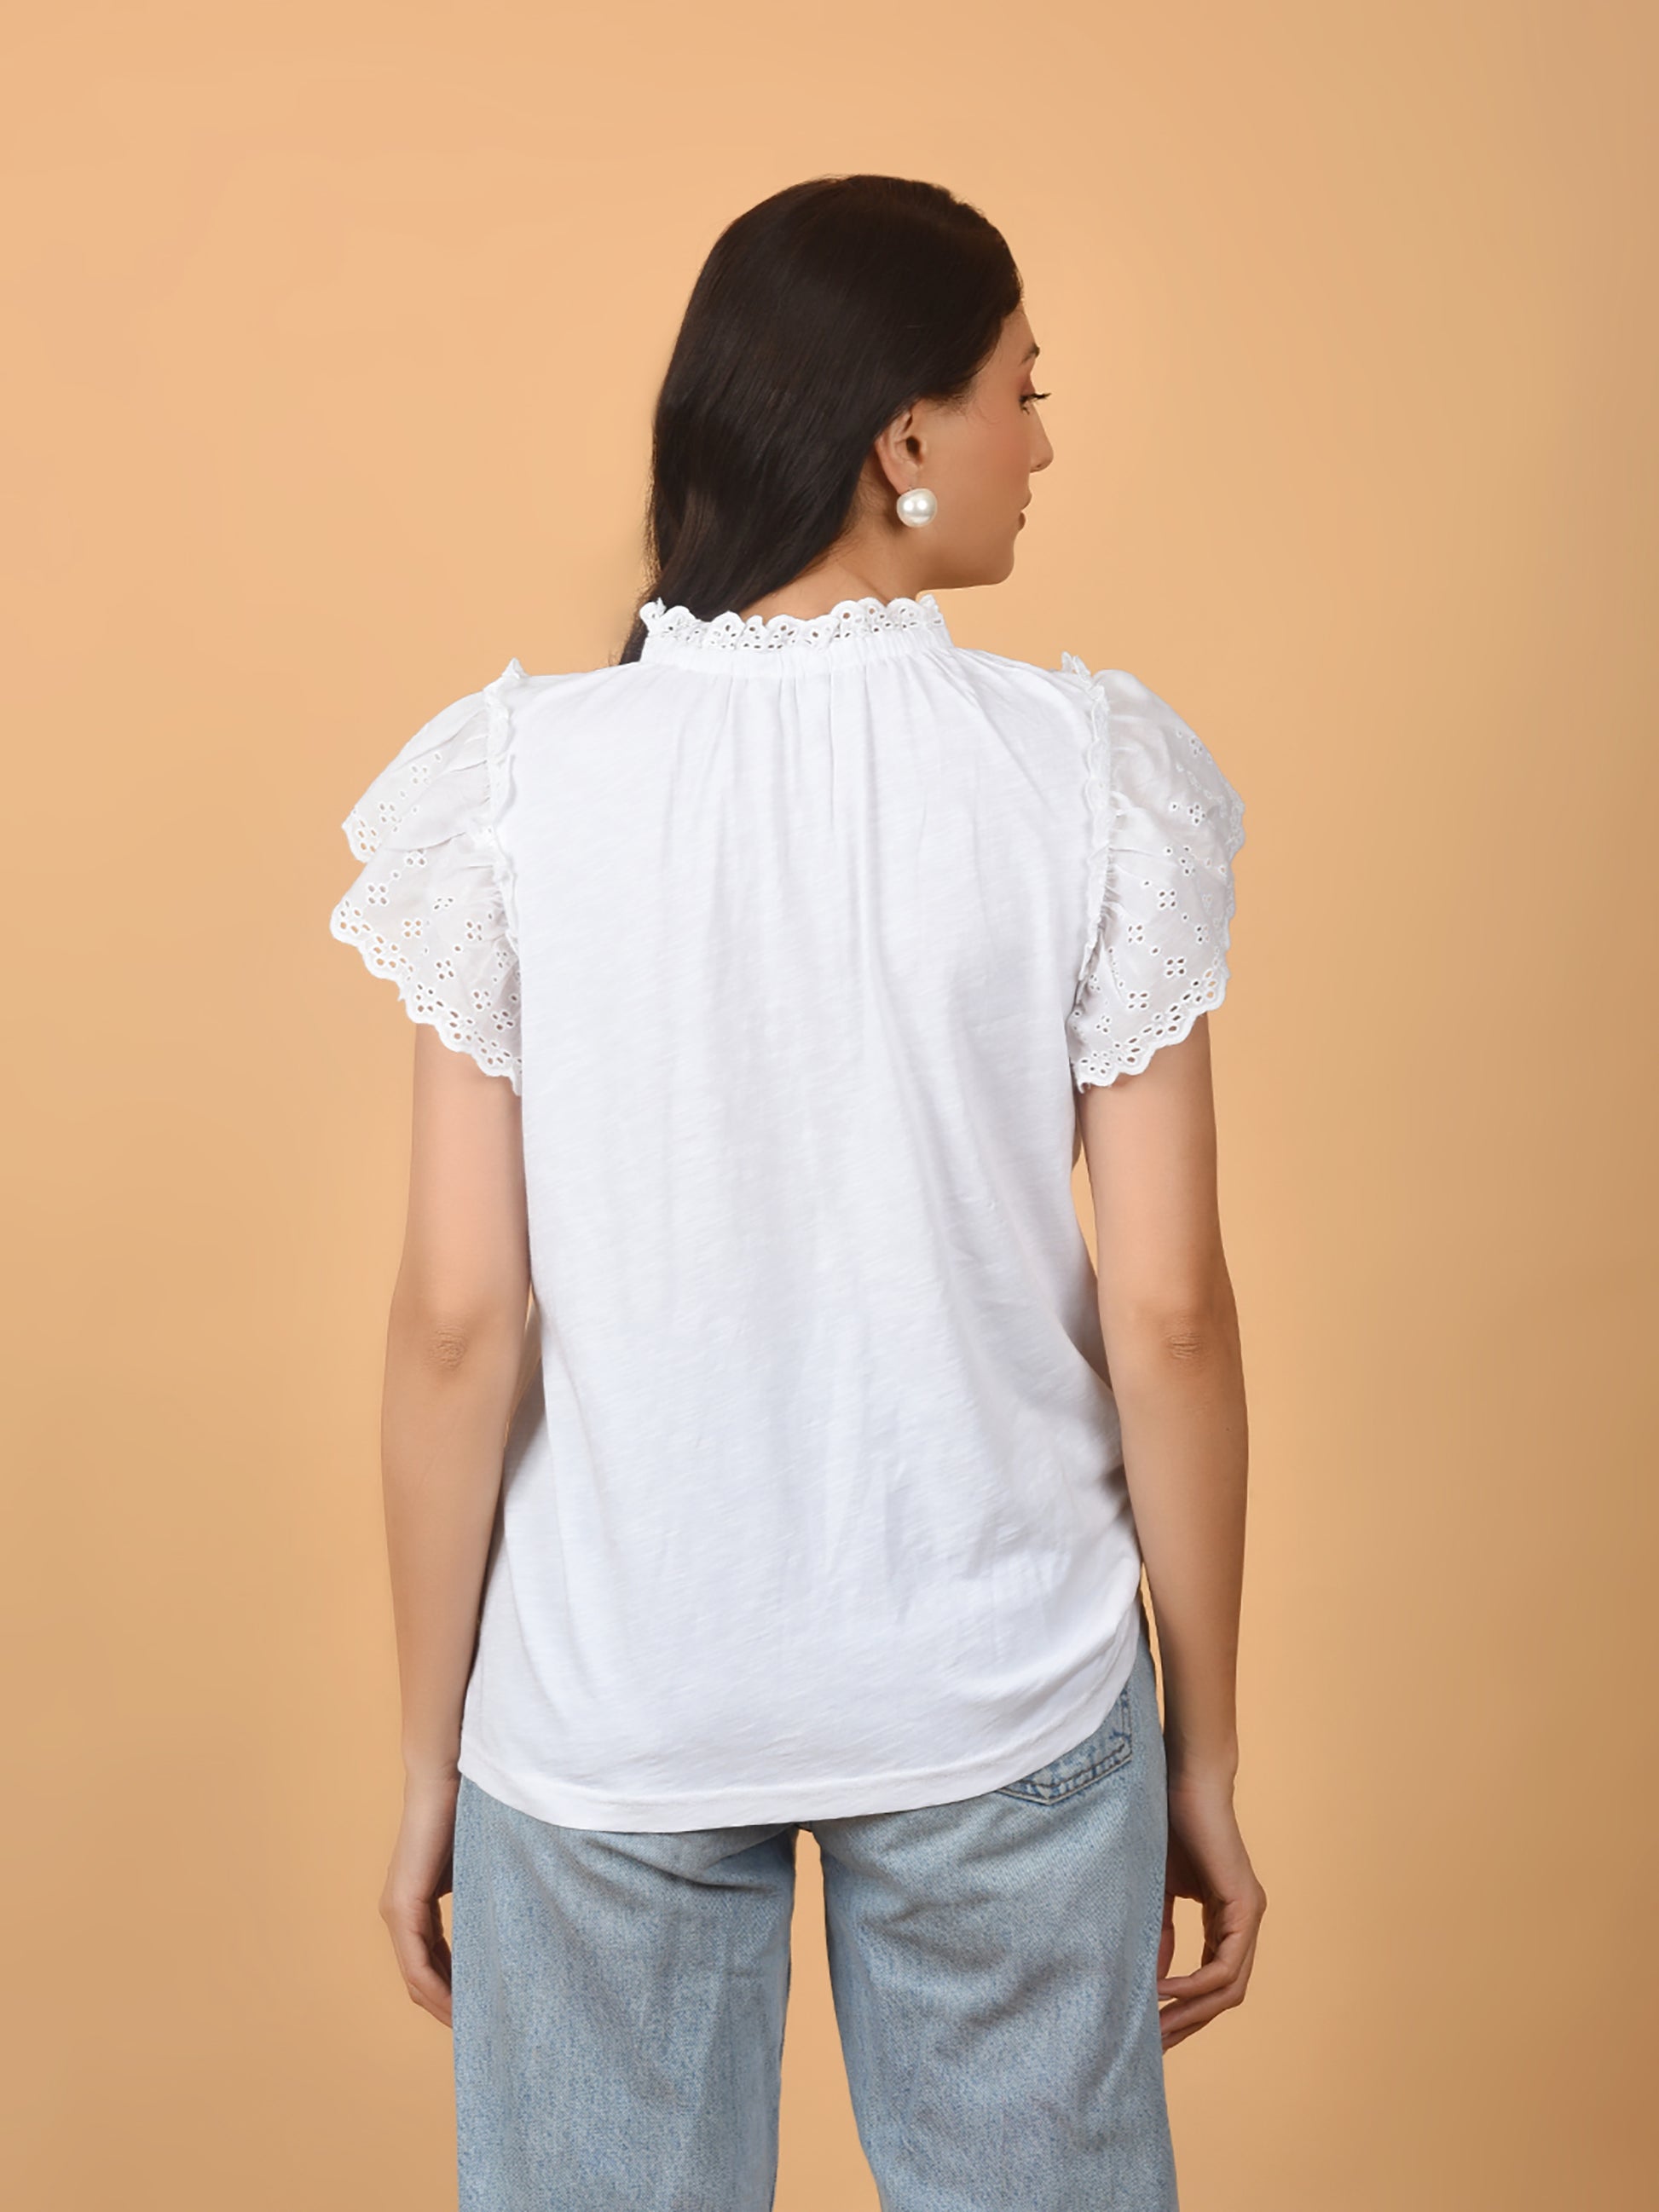 Flawless Women Shiffly Cotton Tops | LOTUS Being Flawless